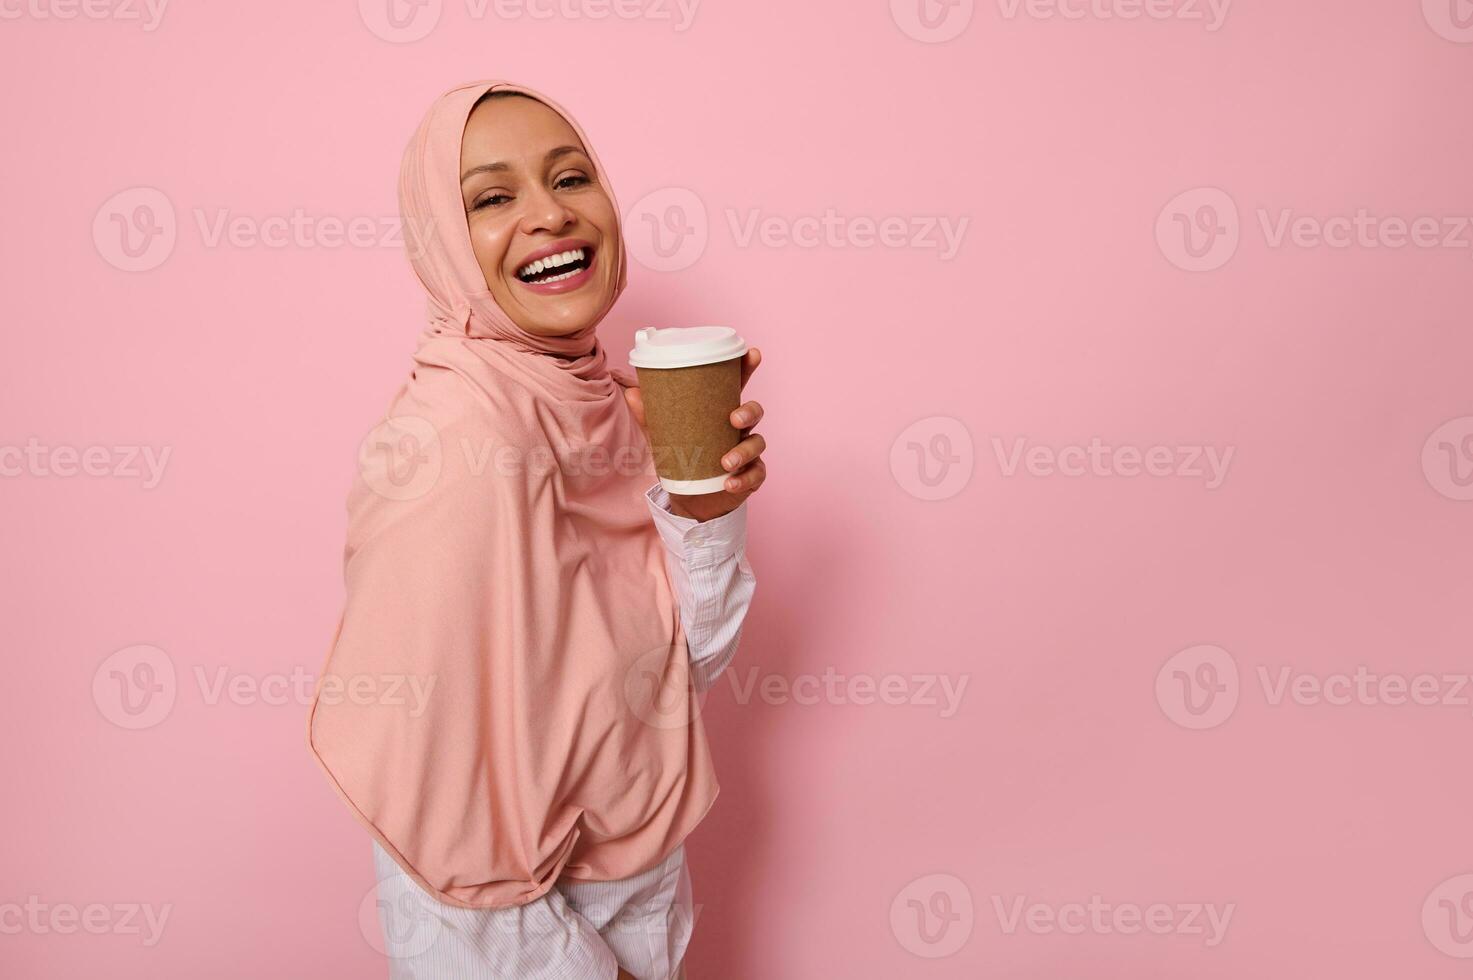 Arabic Muslim woman with covered head in pink hijab holds disposable cardboard takeaway cup, smiles toothy smile, looking at camera, standing three quarters against colored background with copy space photo